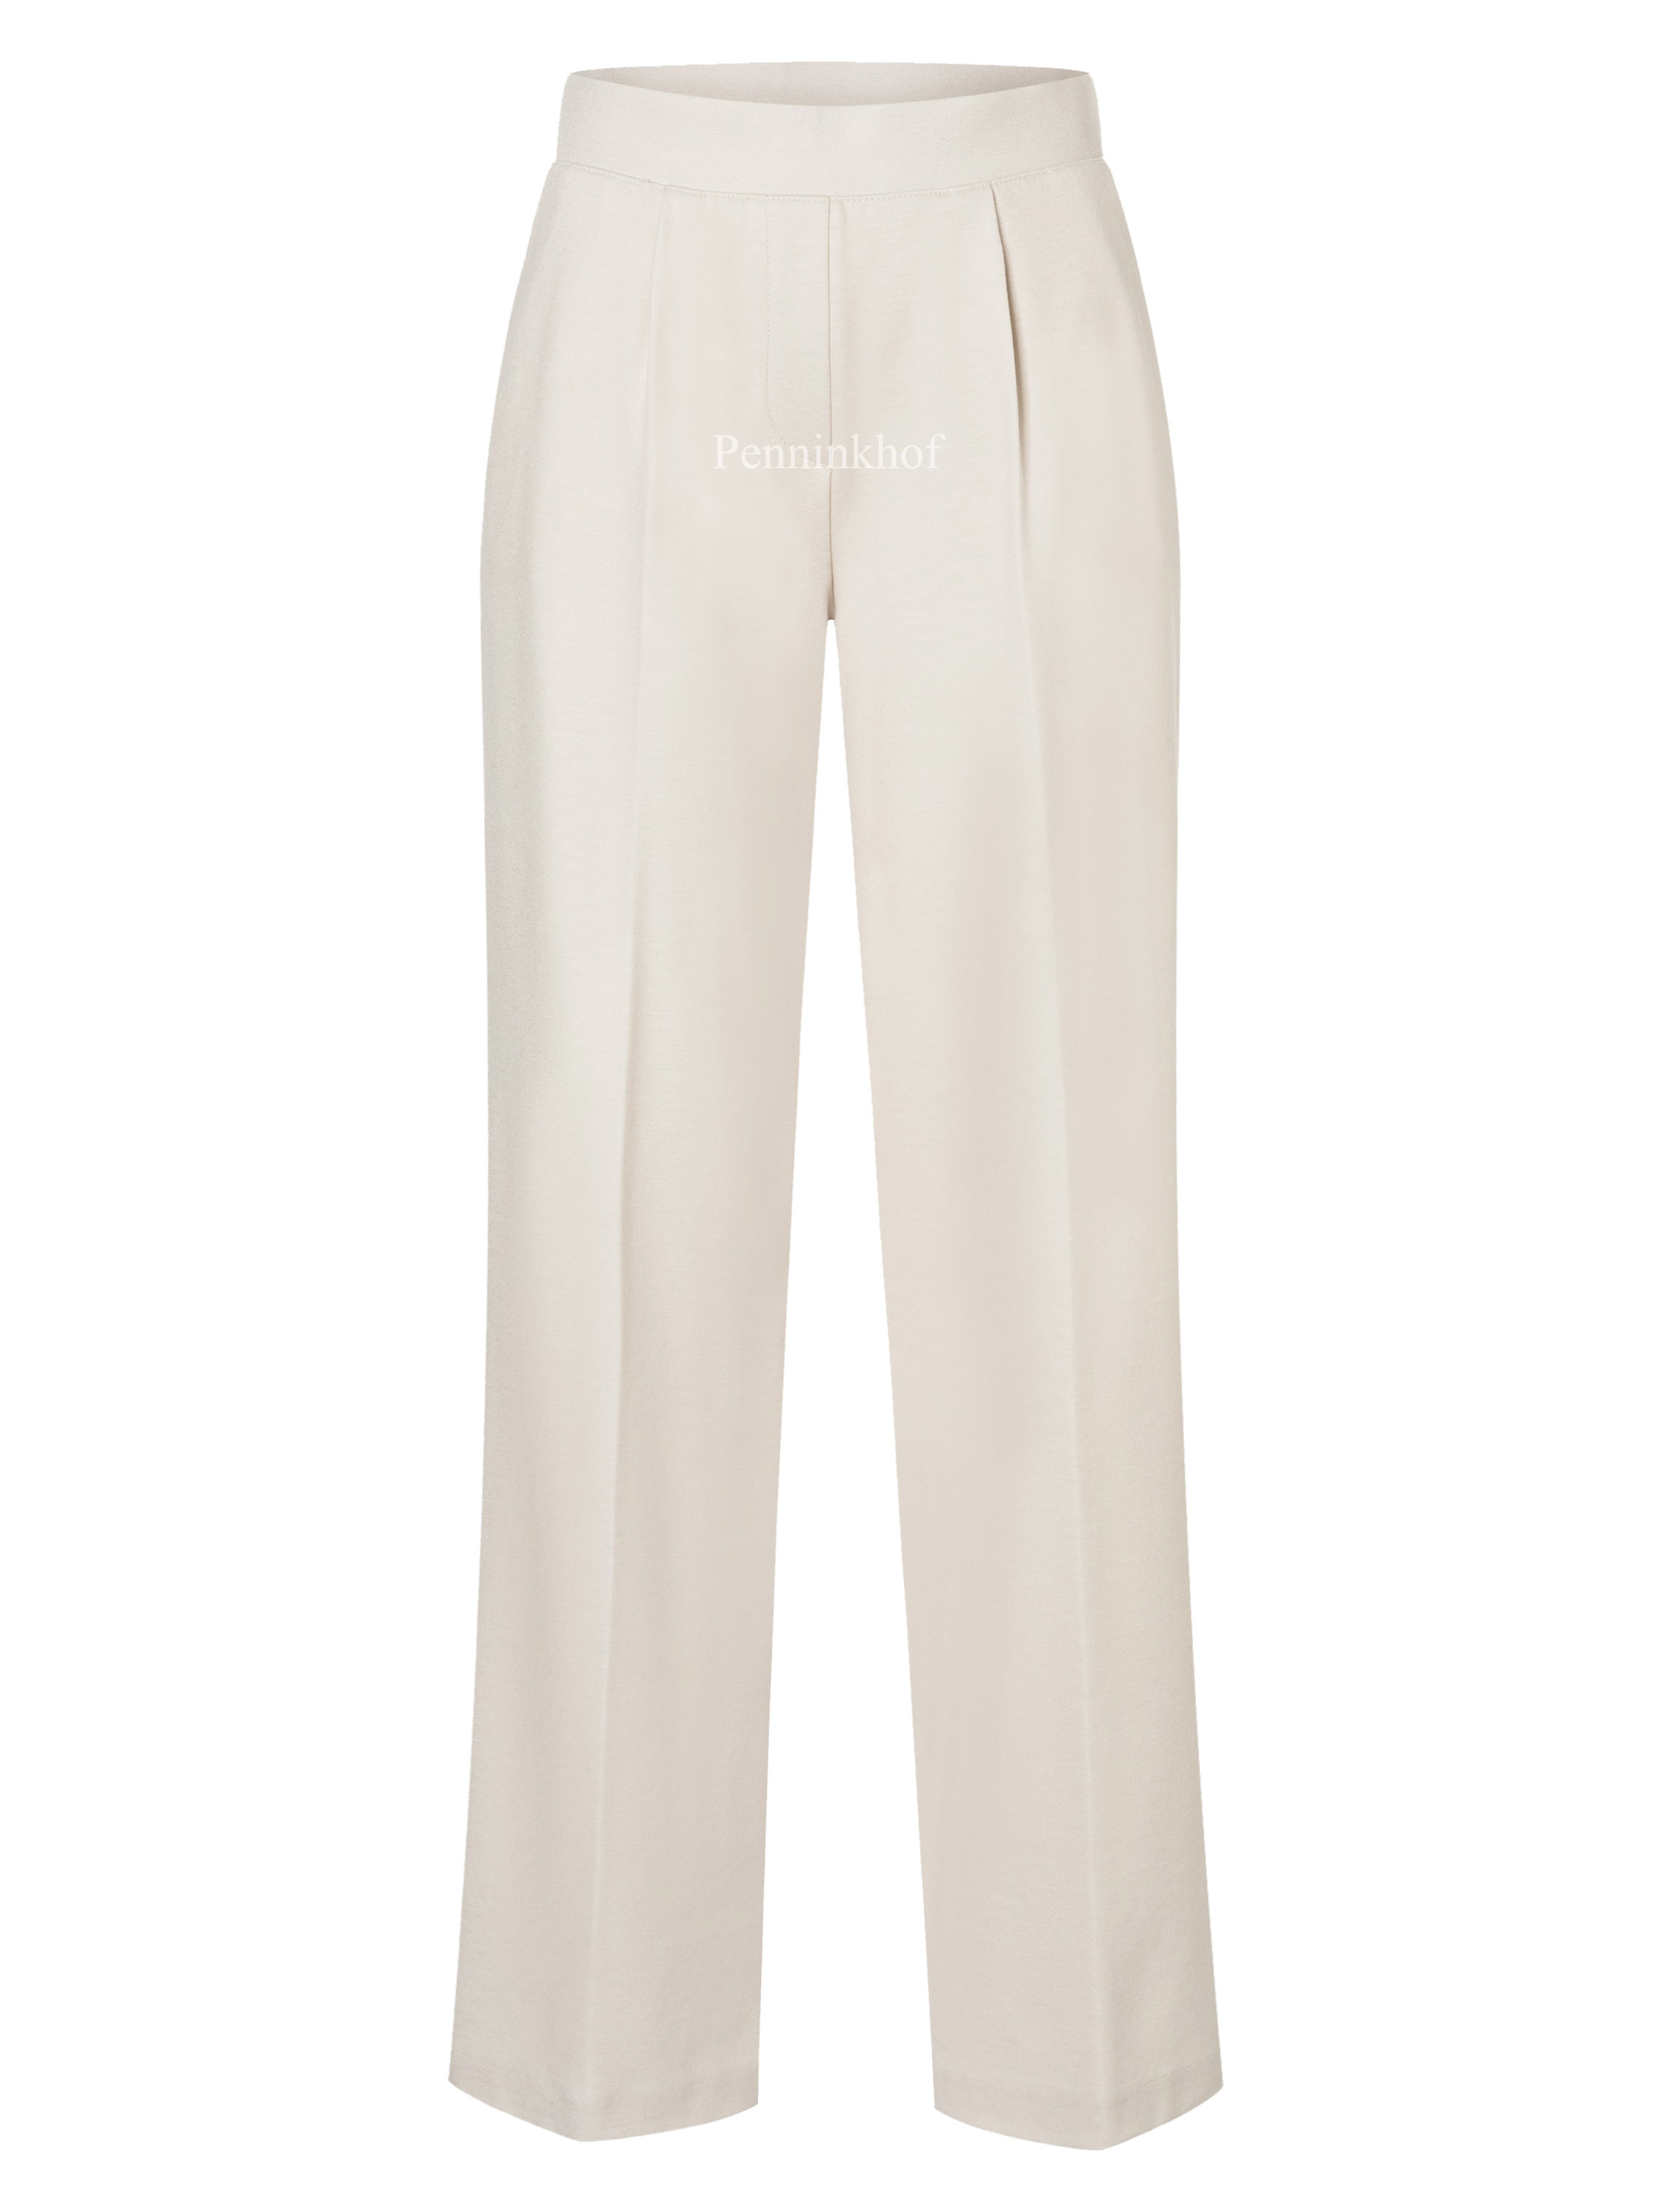 Cambio trousers AVA 6221-0222-00 Beige by Penninkhoffashion.com